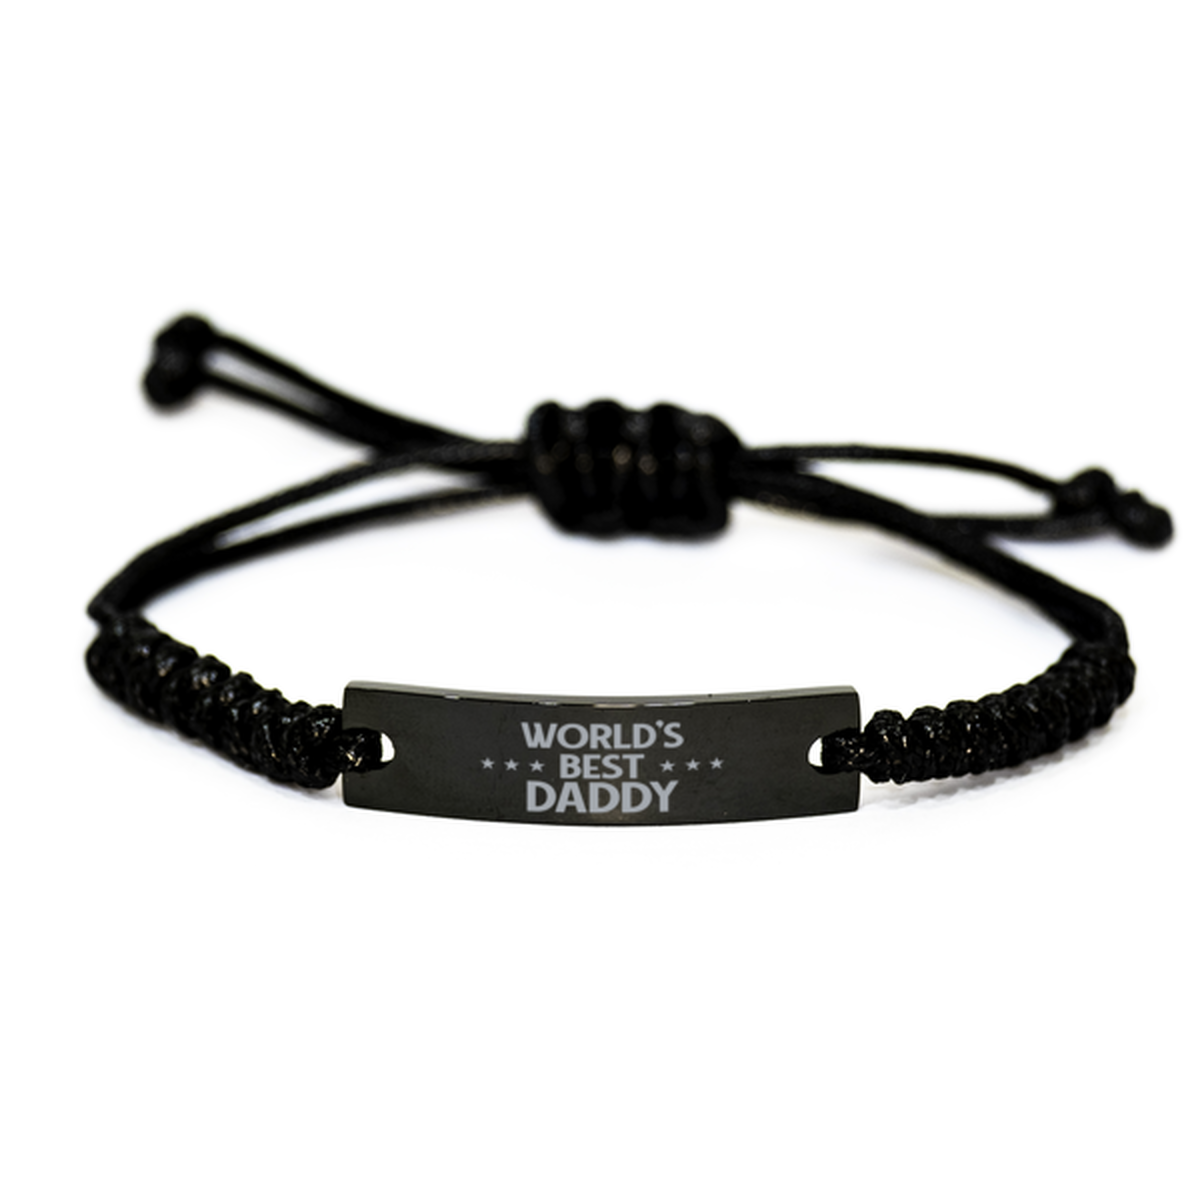 World's Best Daddy Gifts, Funny Engraved Rope Bracelet For Daddy, Birthday Family Gifts For Men